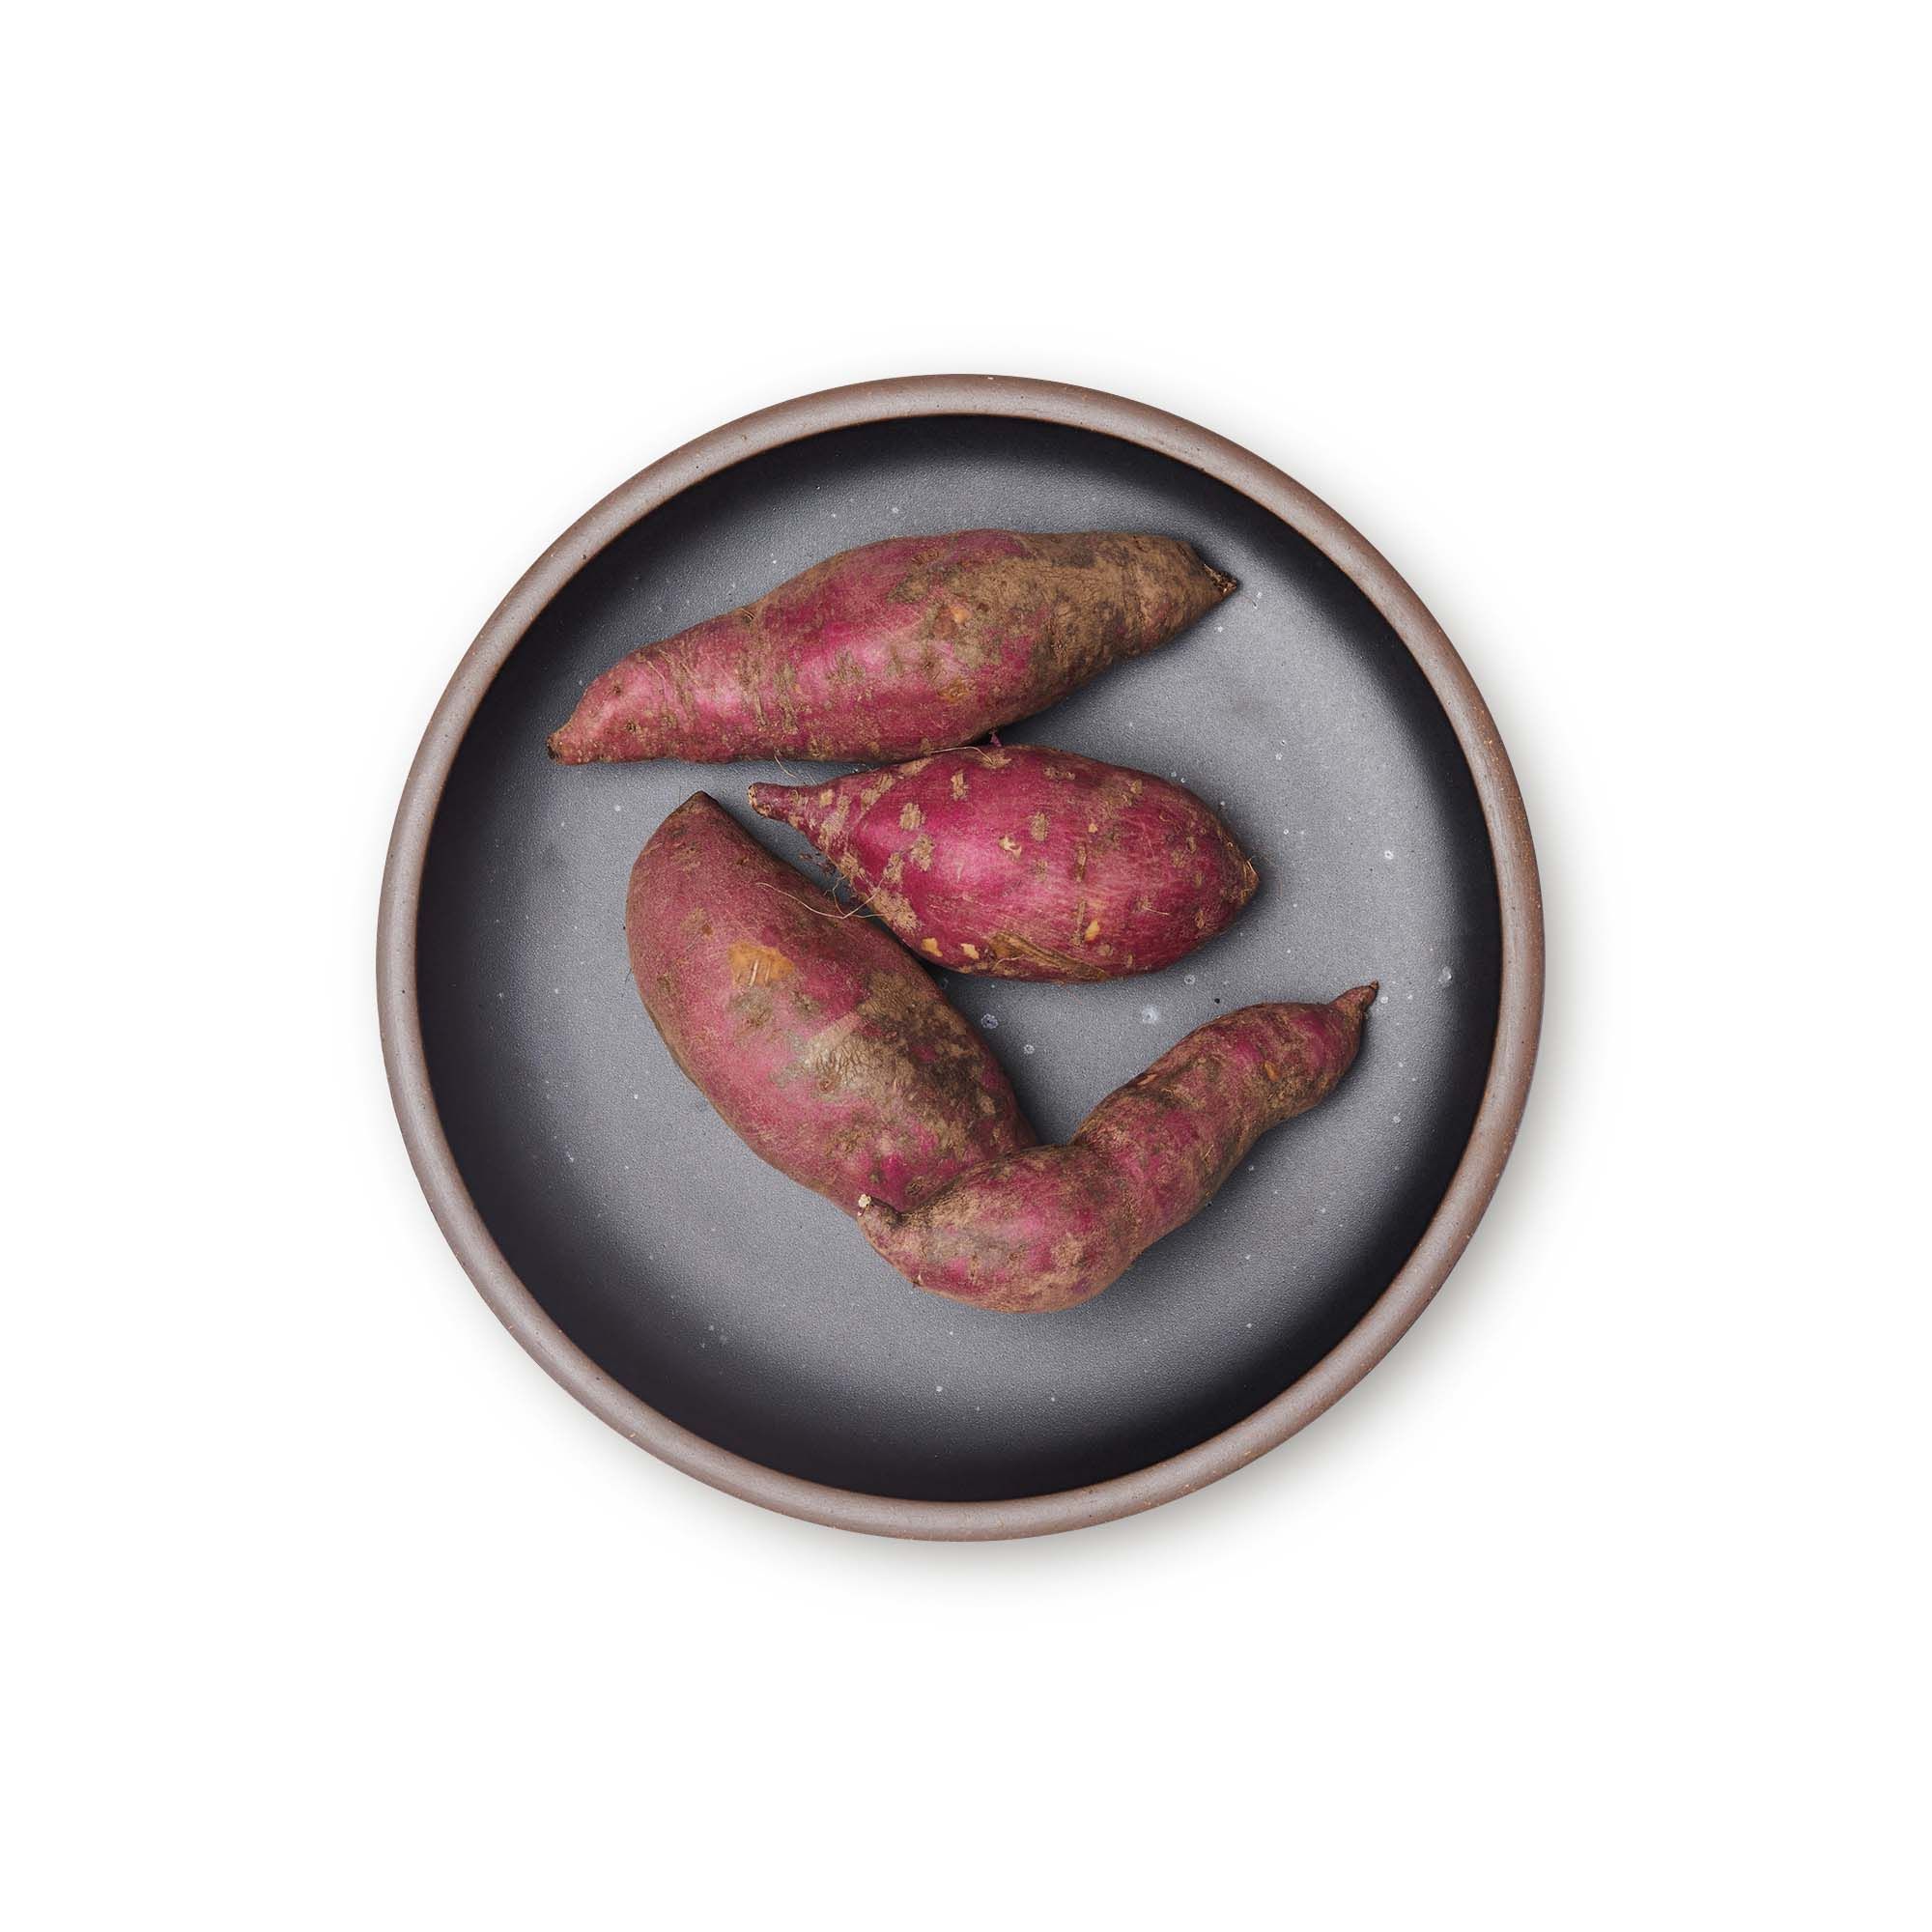 Sweet potatoes on a dinner sized ceramic plate in a graphite black color featuring iron speckles and an unglazed rim.